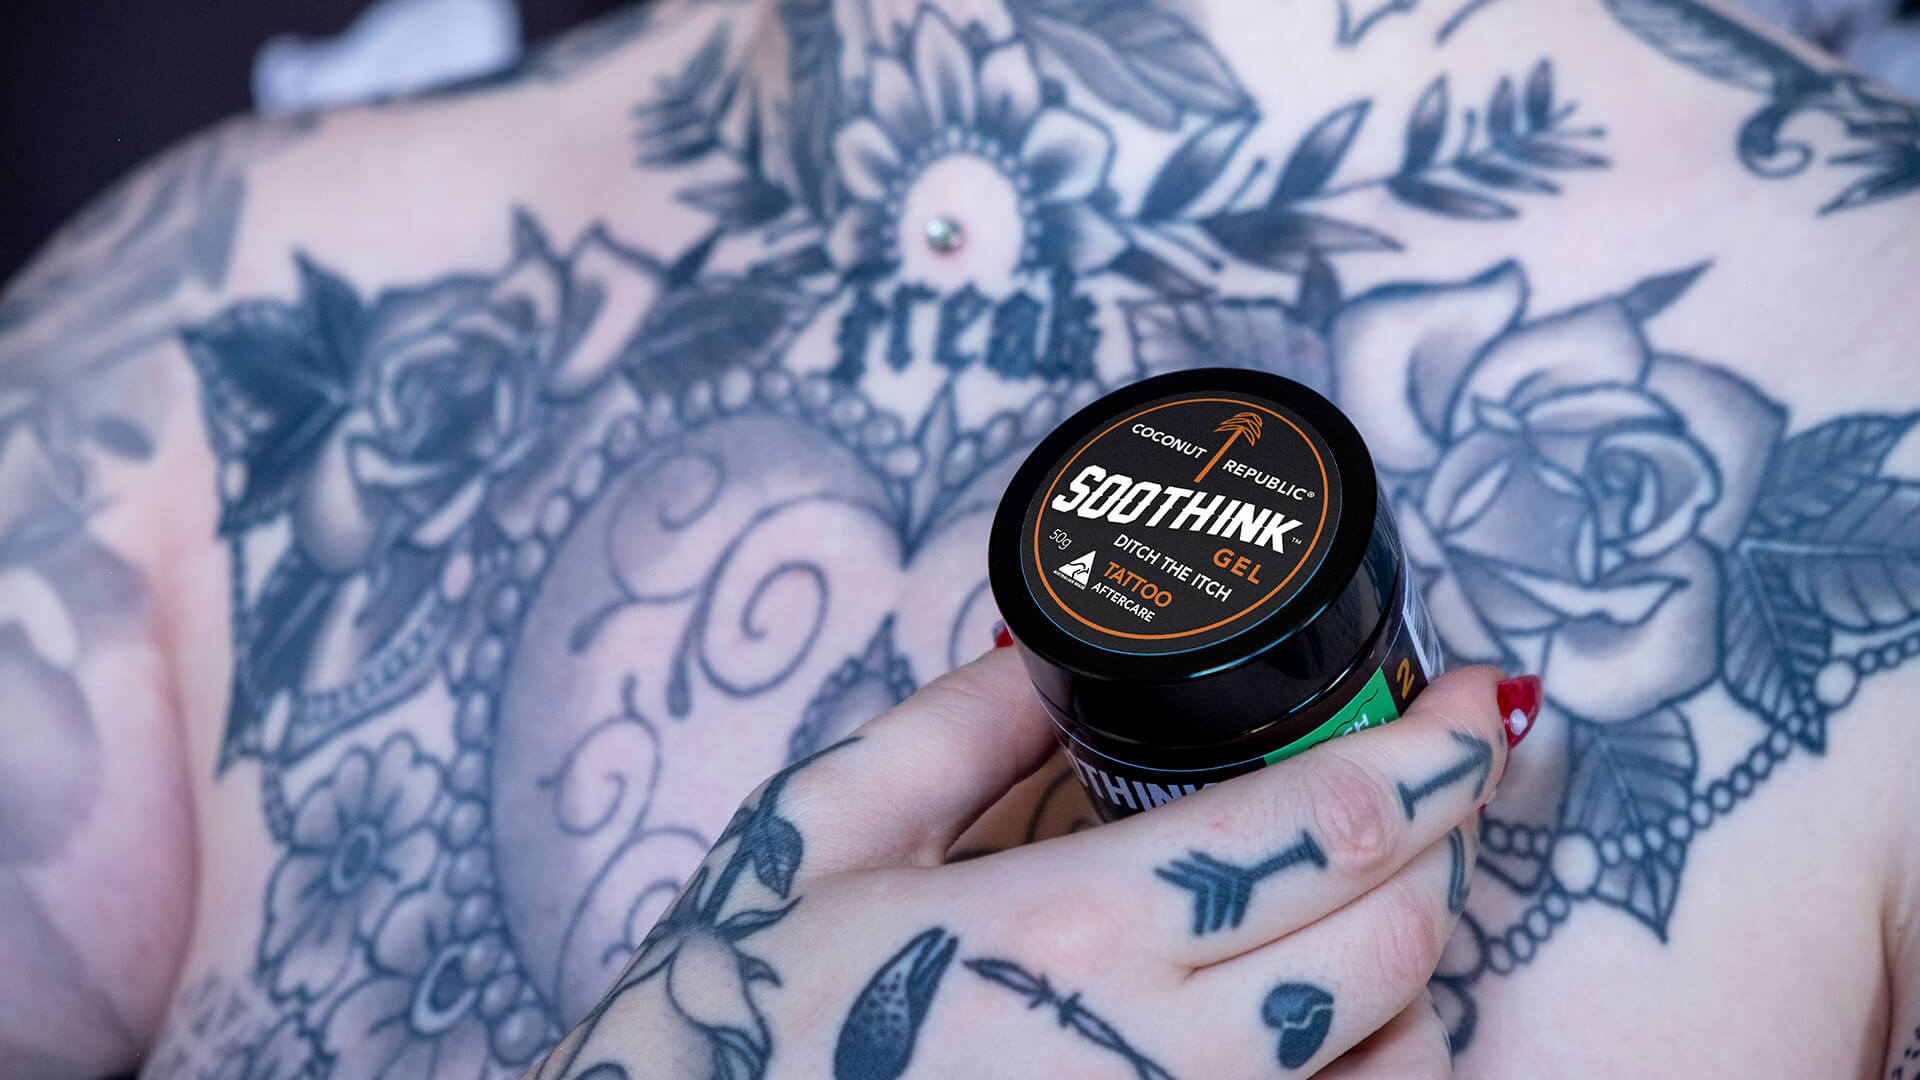 After Tattoo Manufacturer | Skincare products Manufacturer